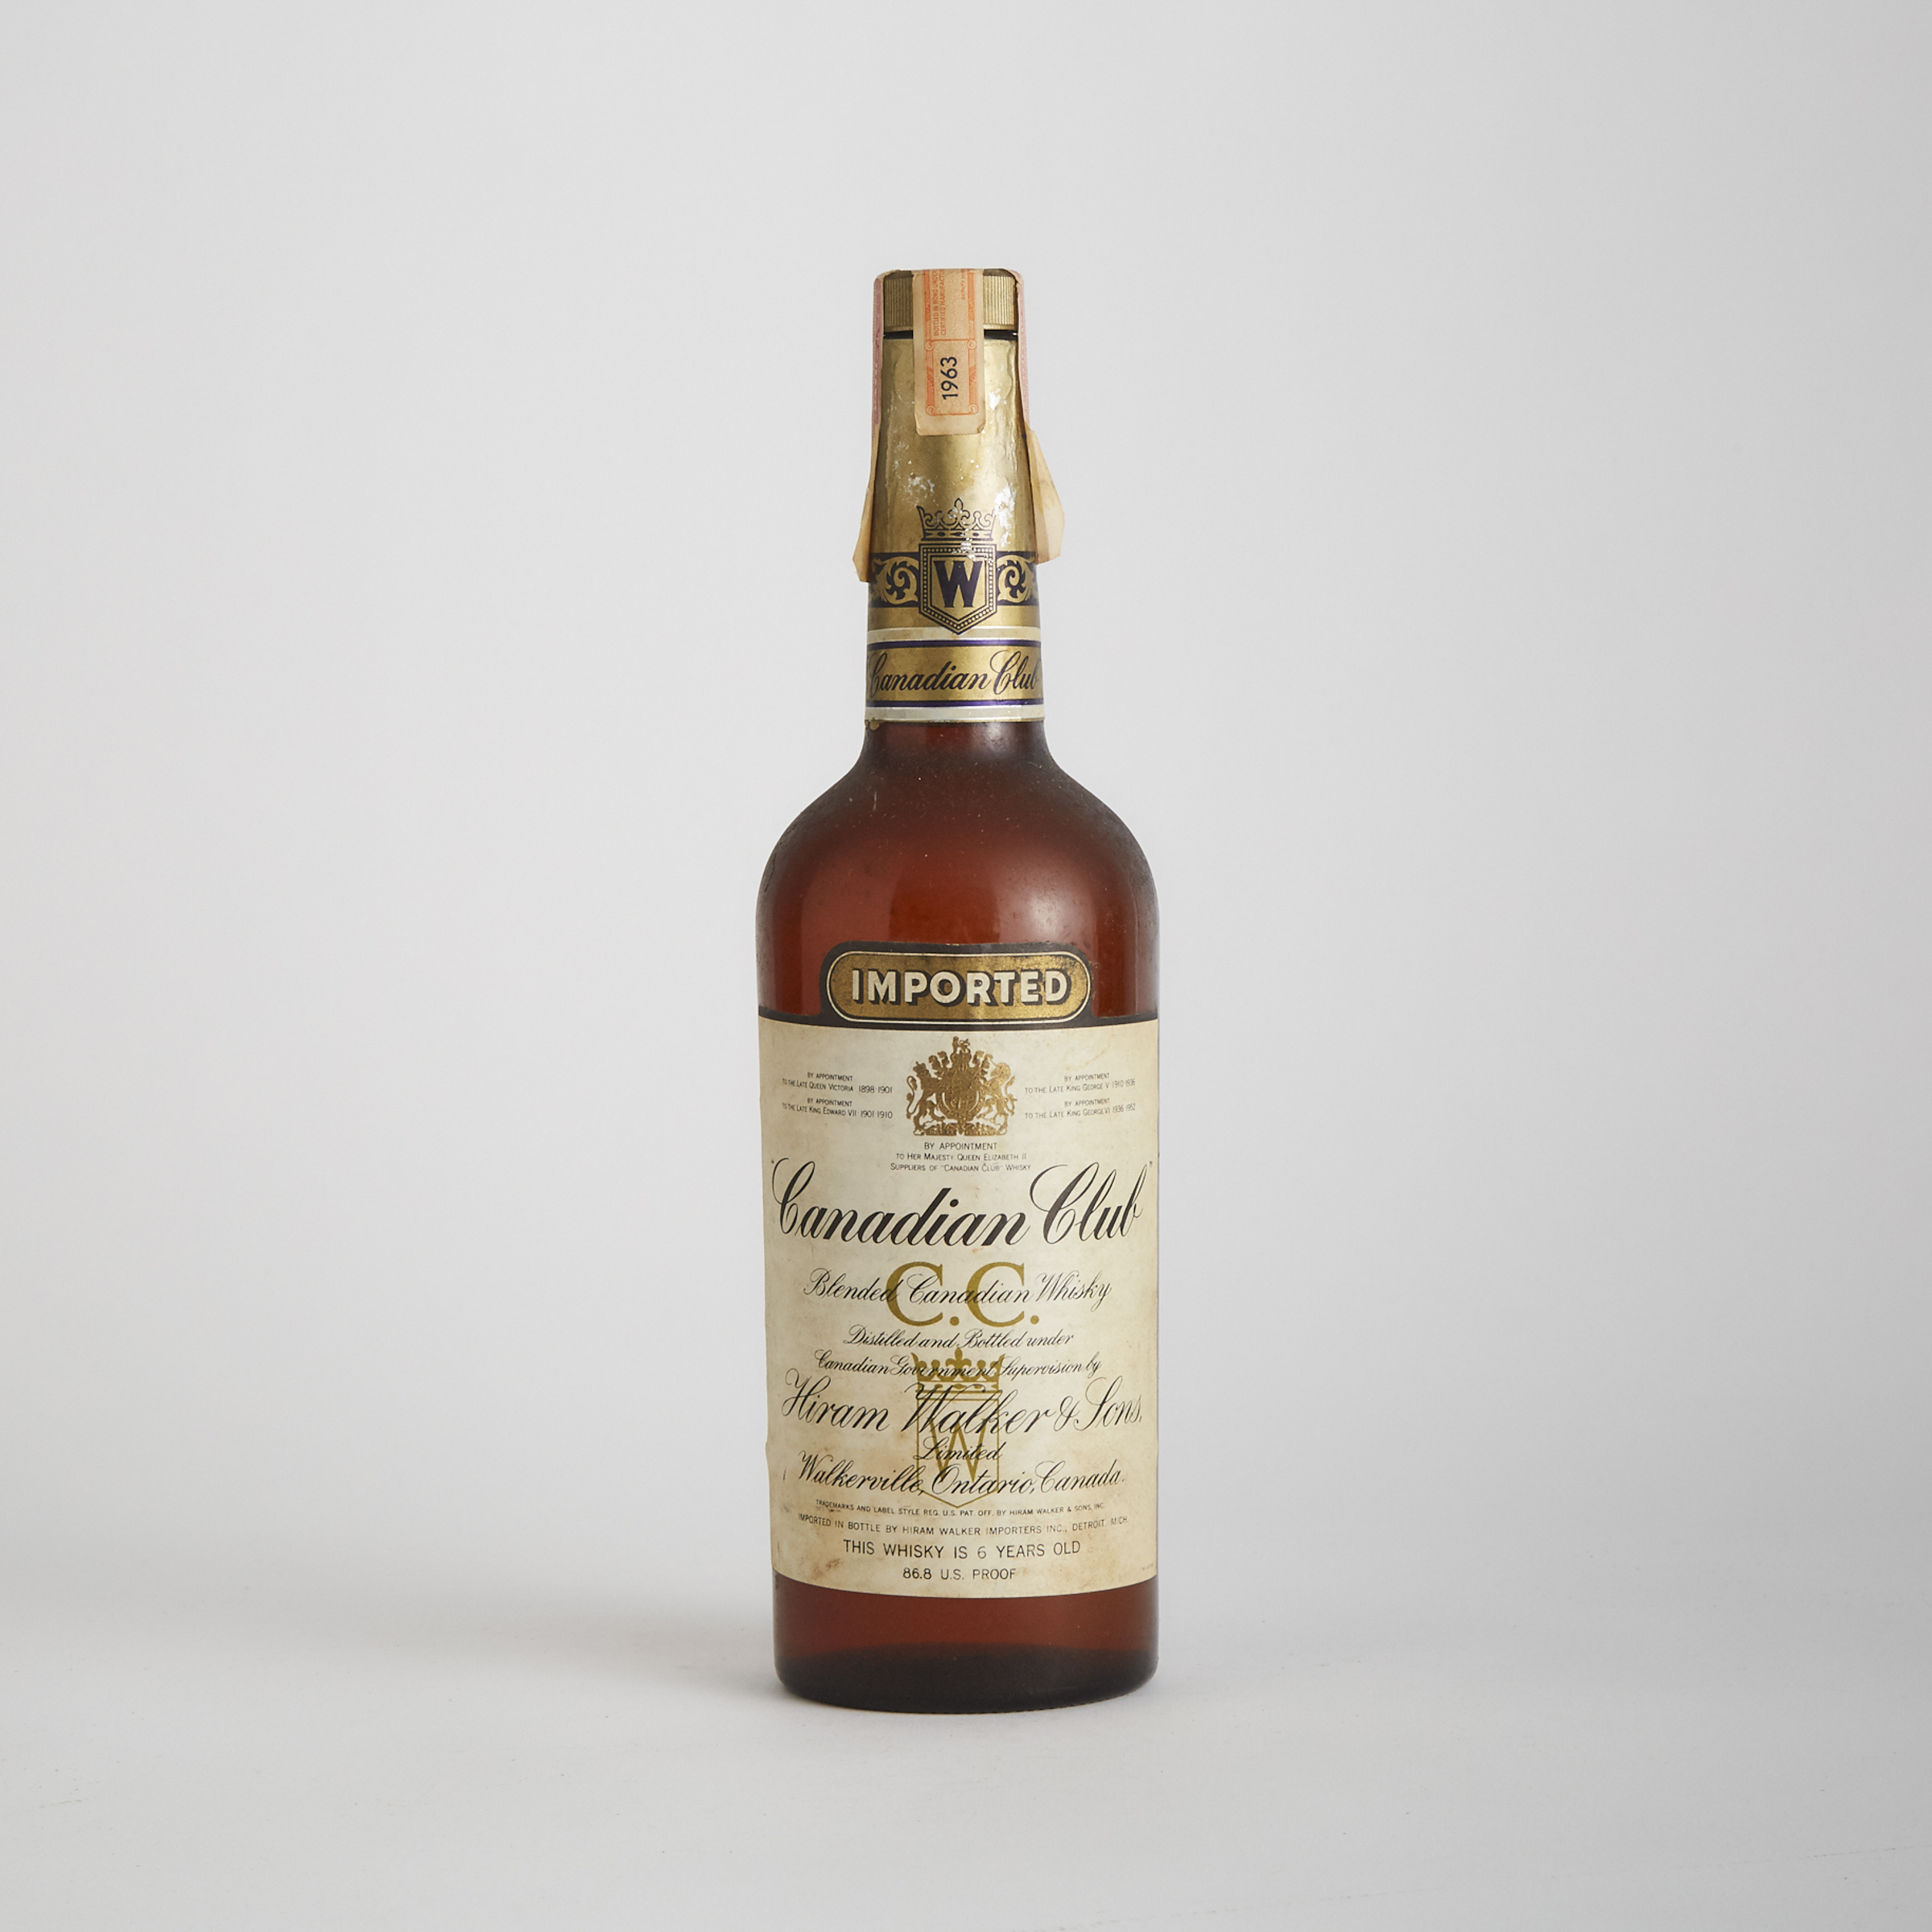 CANADIAN CLUB BLENDED CANADIAN WHISKY 6 YEARS (ONE)